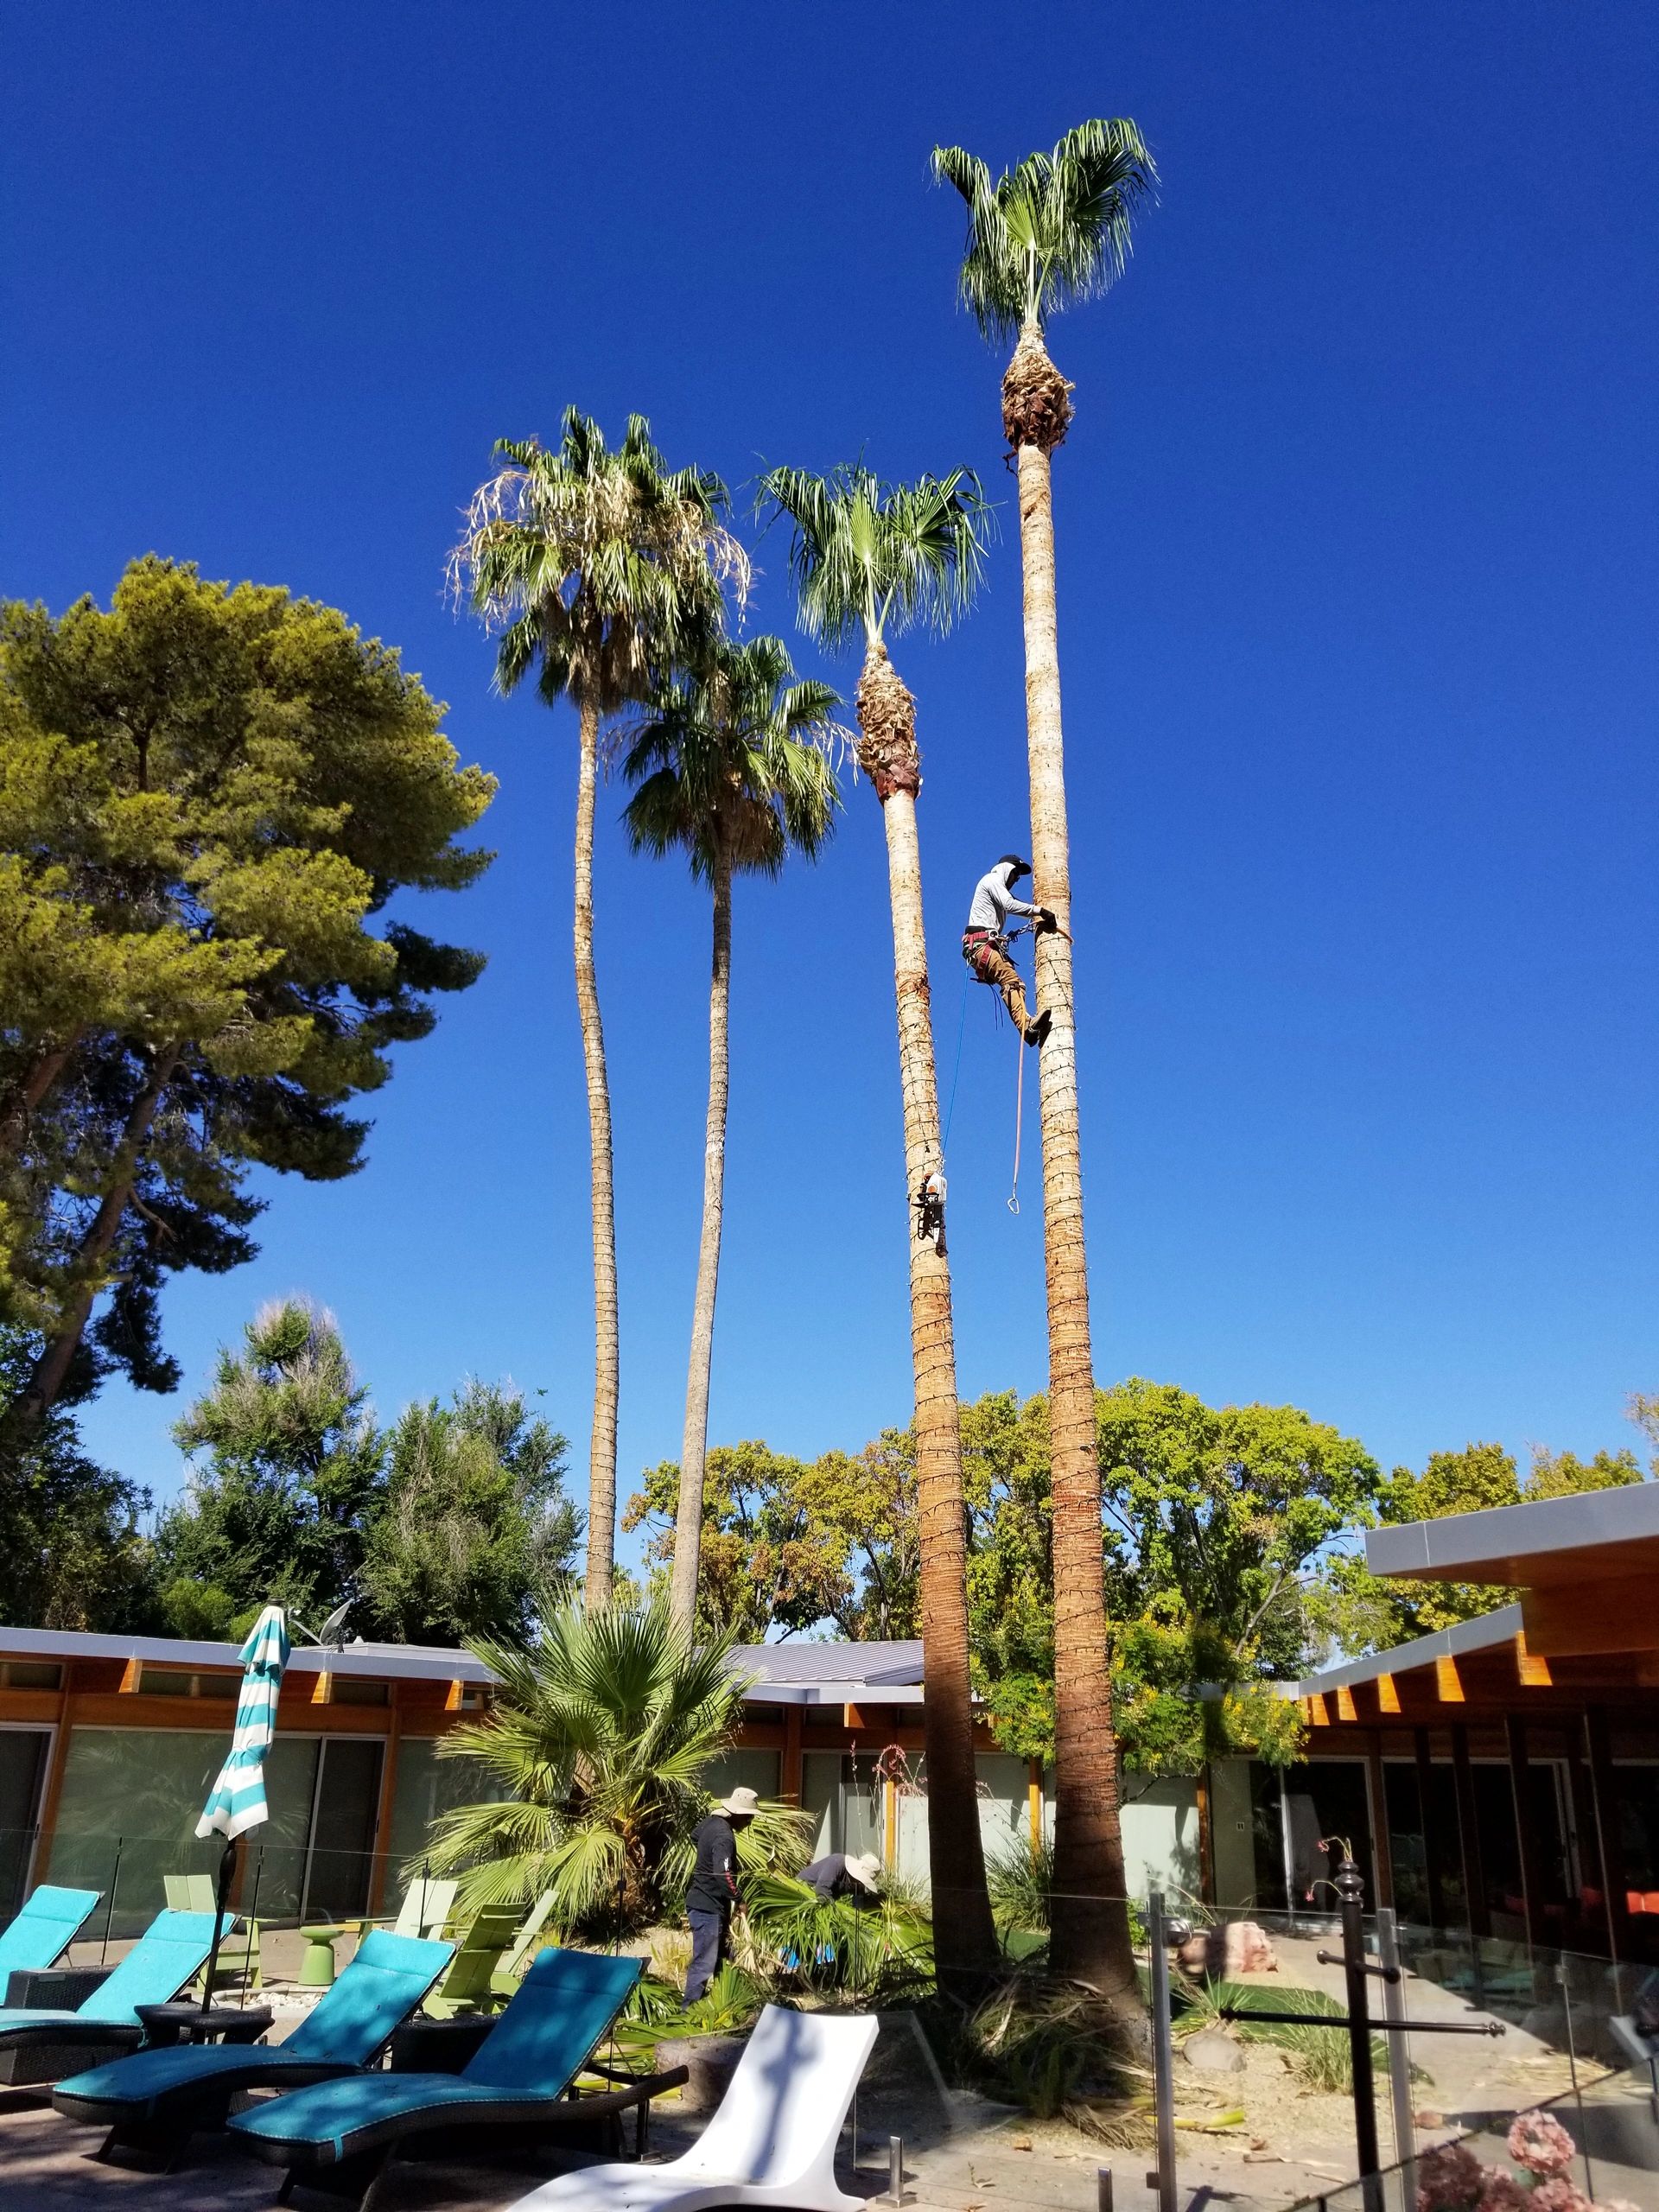 Pablo's Palmas is your Las Vegas Landscaping & Tree Services Company.  We offer monthly services in 